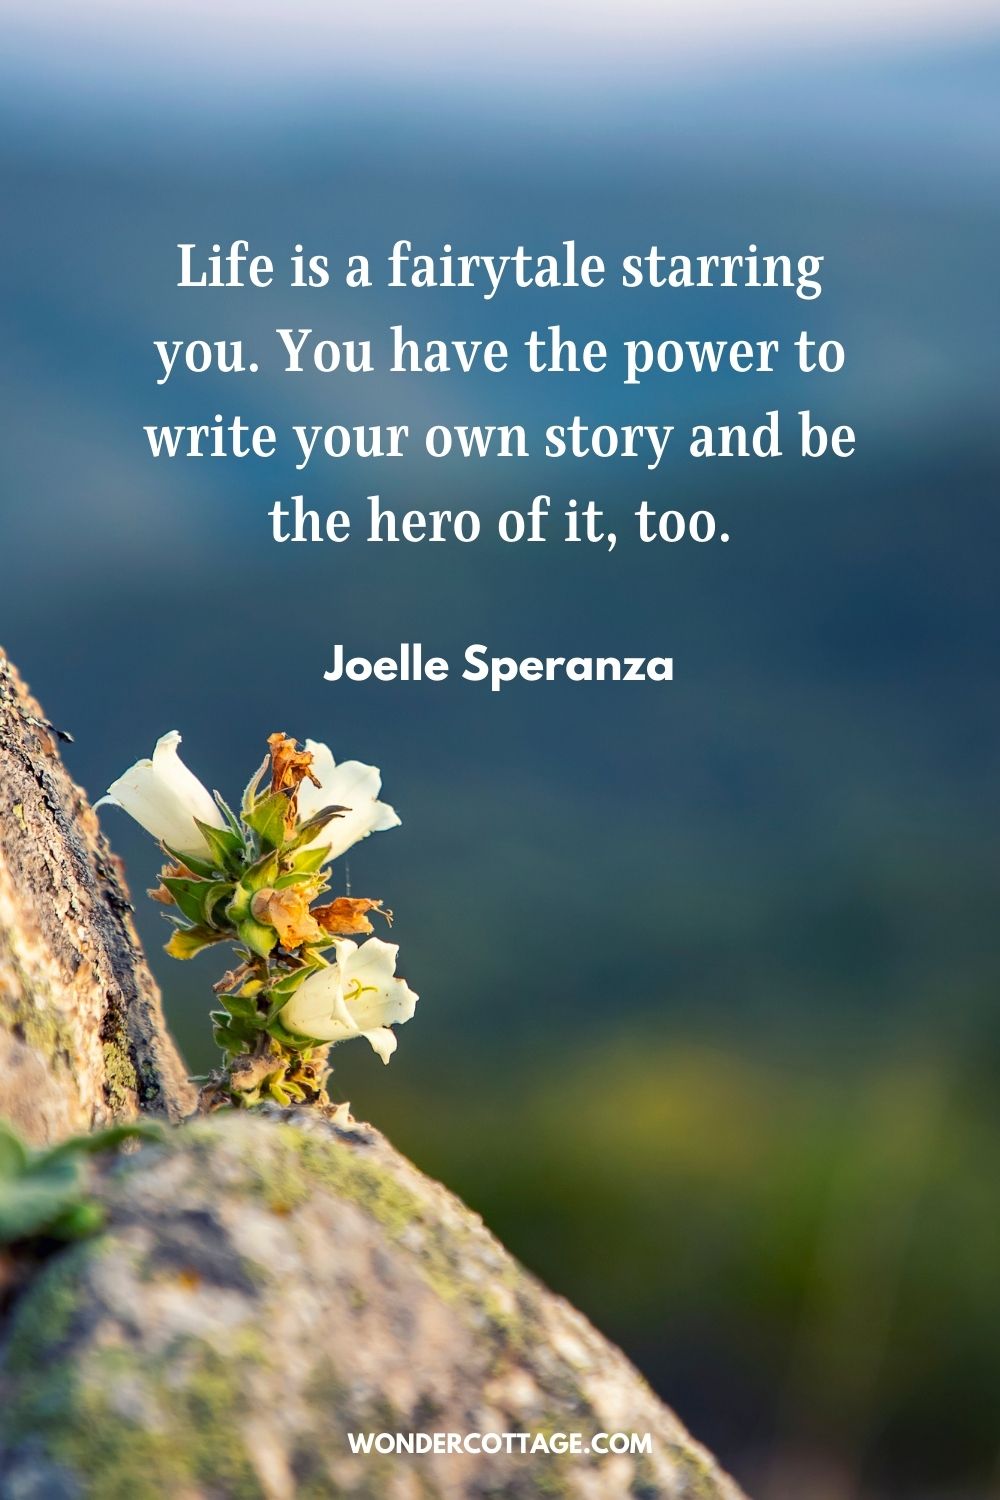 Life is a fairytale starring you. You have the power to write your own story and be the hero of it, too. Joelle Speranza